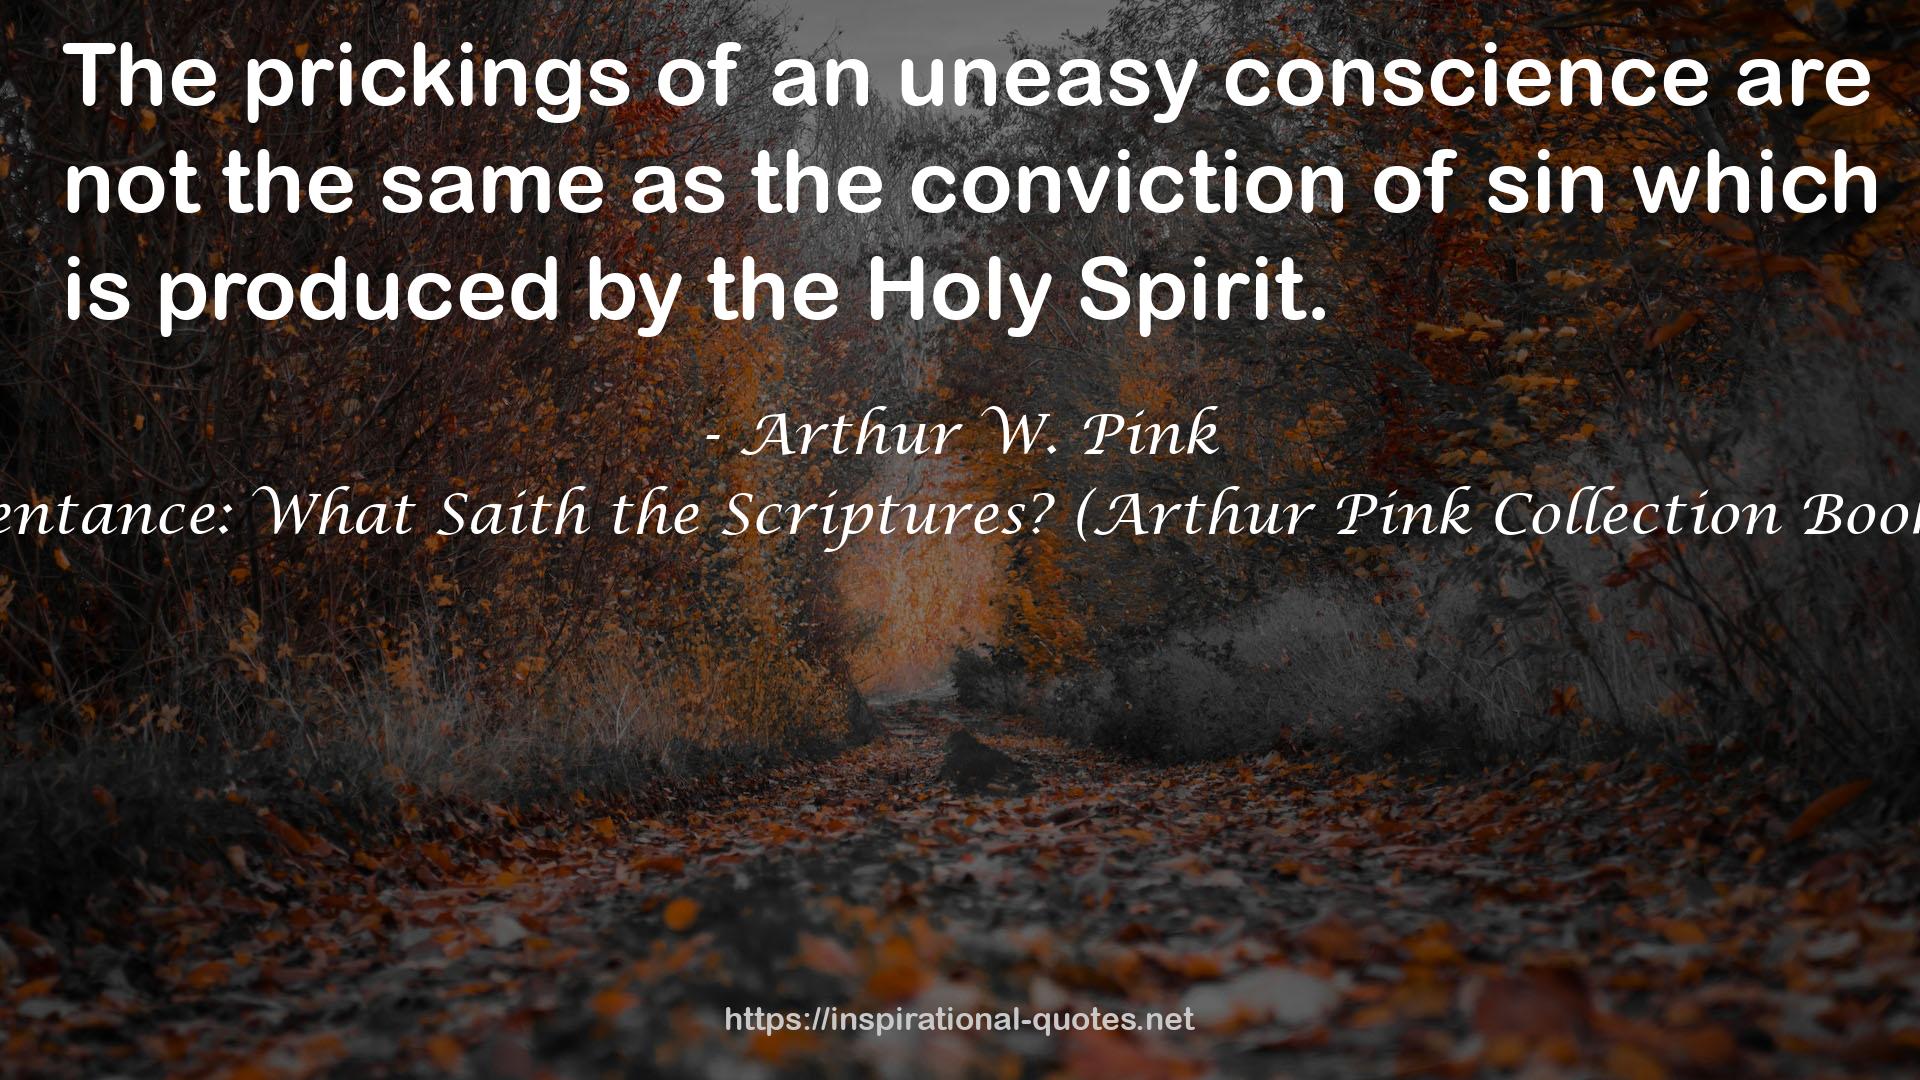 Repentance: What Saith the Scriptures? (Arthur Pink Collection Book 46) QUOTES